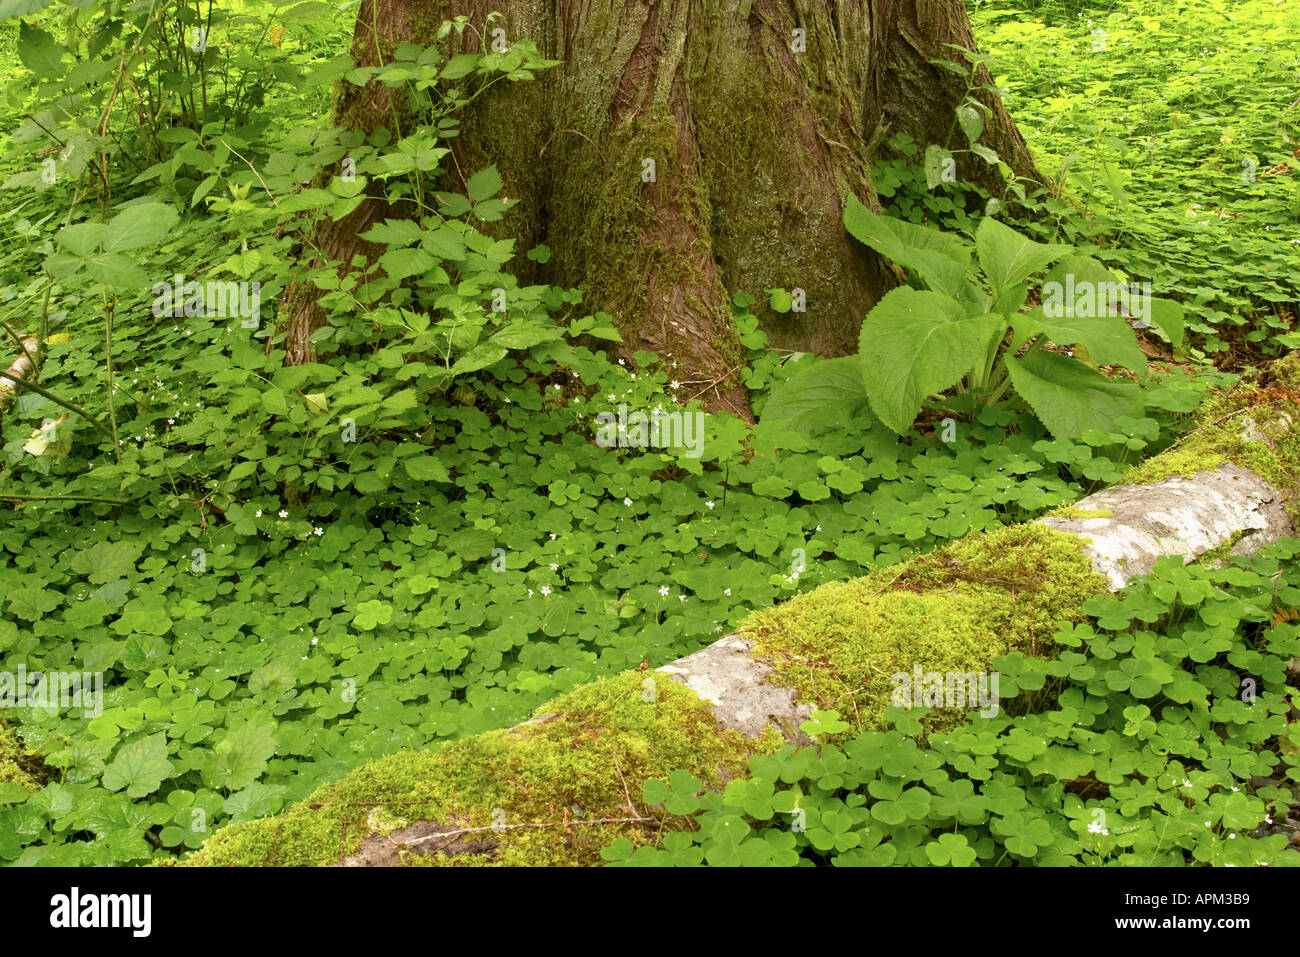 Green ground cover downed log Western Red Cedar Quinault Rain Forest Olympic National Park Washington USA Stock Photo